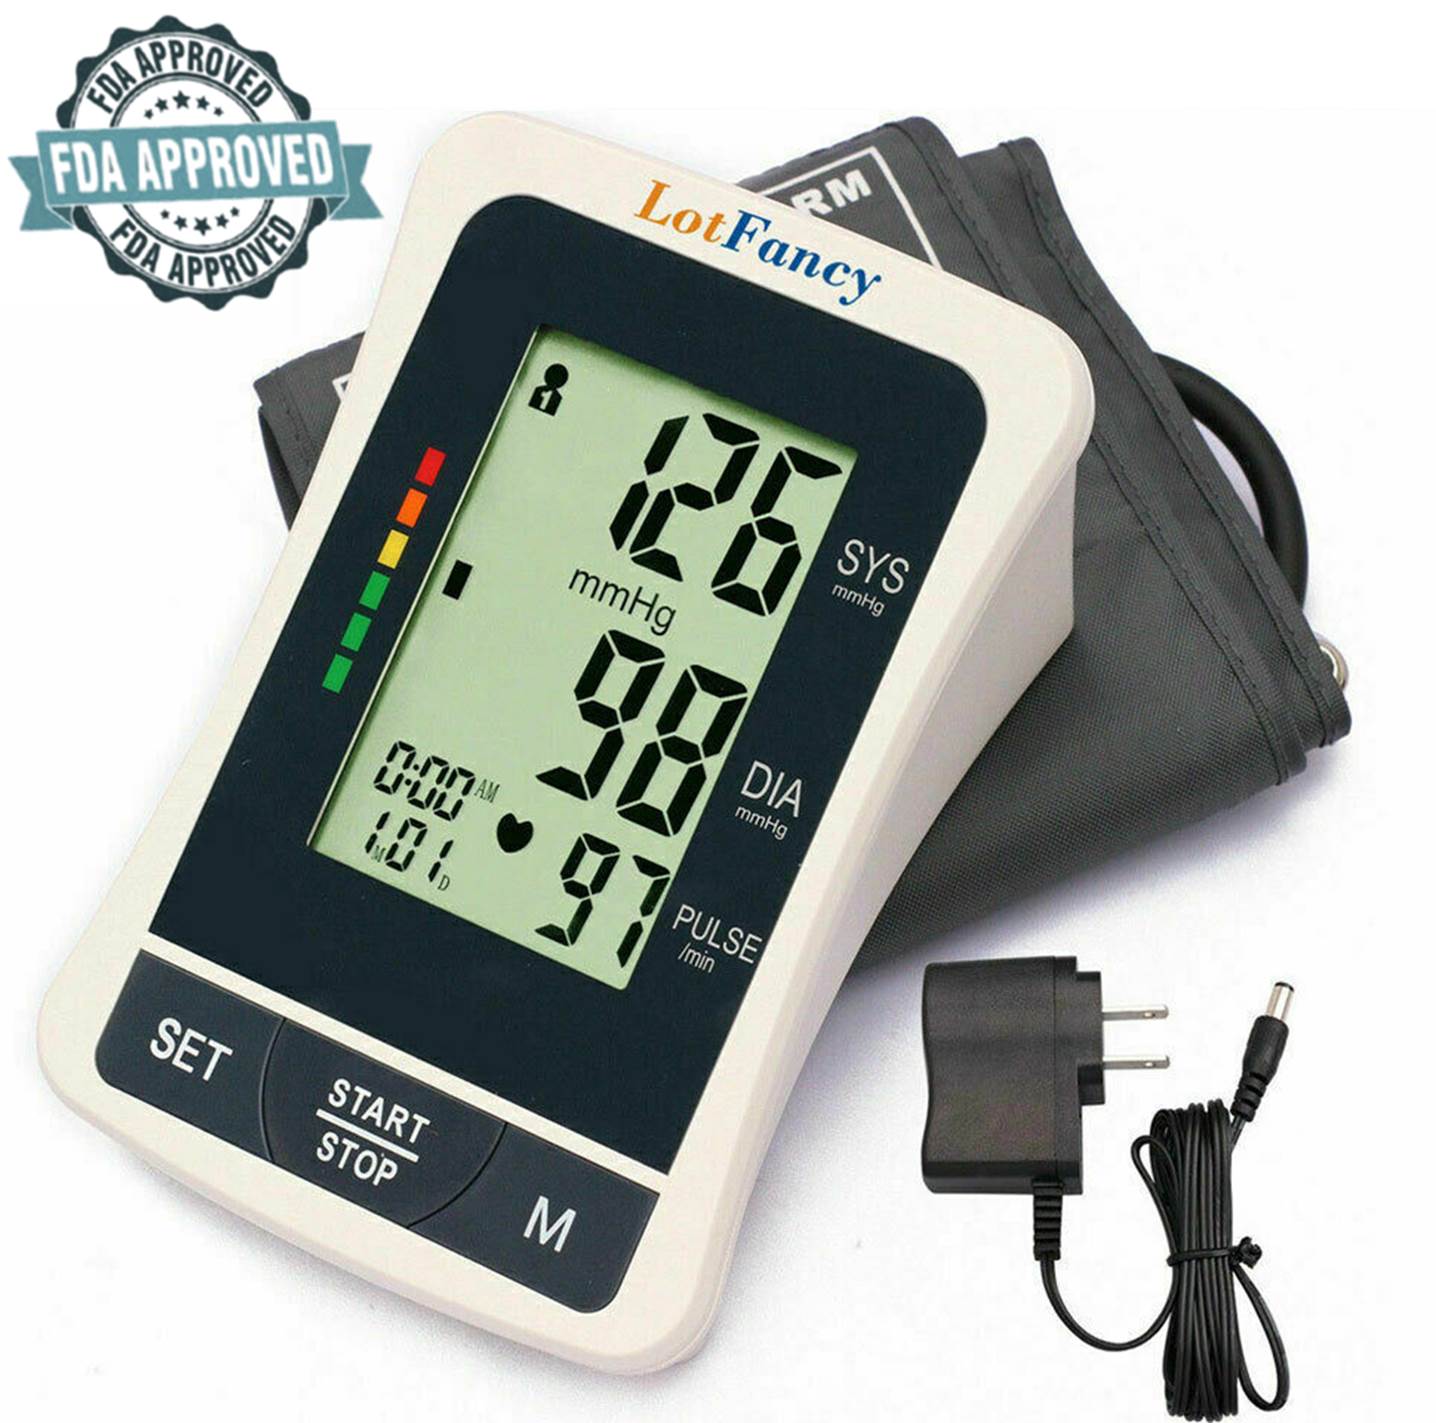 This best bp monitor helps you to blood pressure test (both systolic and diastolic pressure) and presents the information in a clear digital display screen making it easy to determine whether your pressure at risk – enjoy using this blood pressure tester!